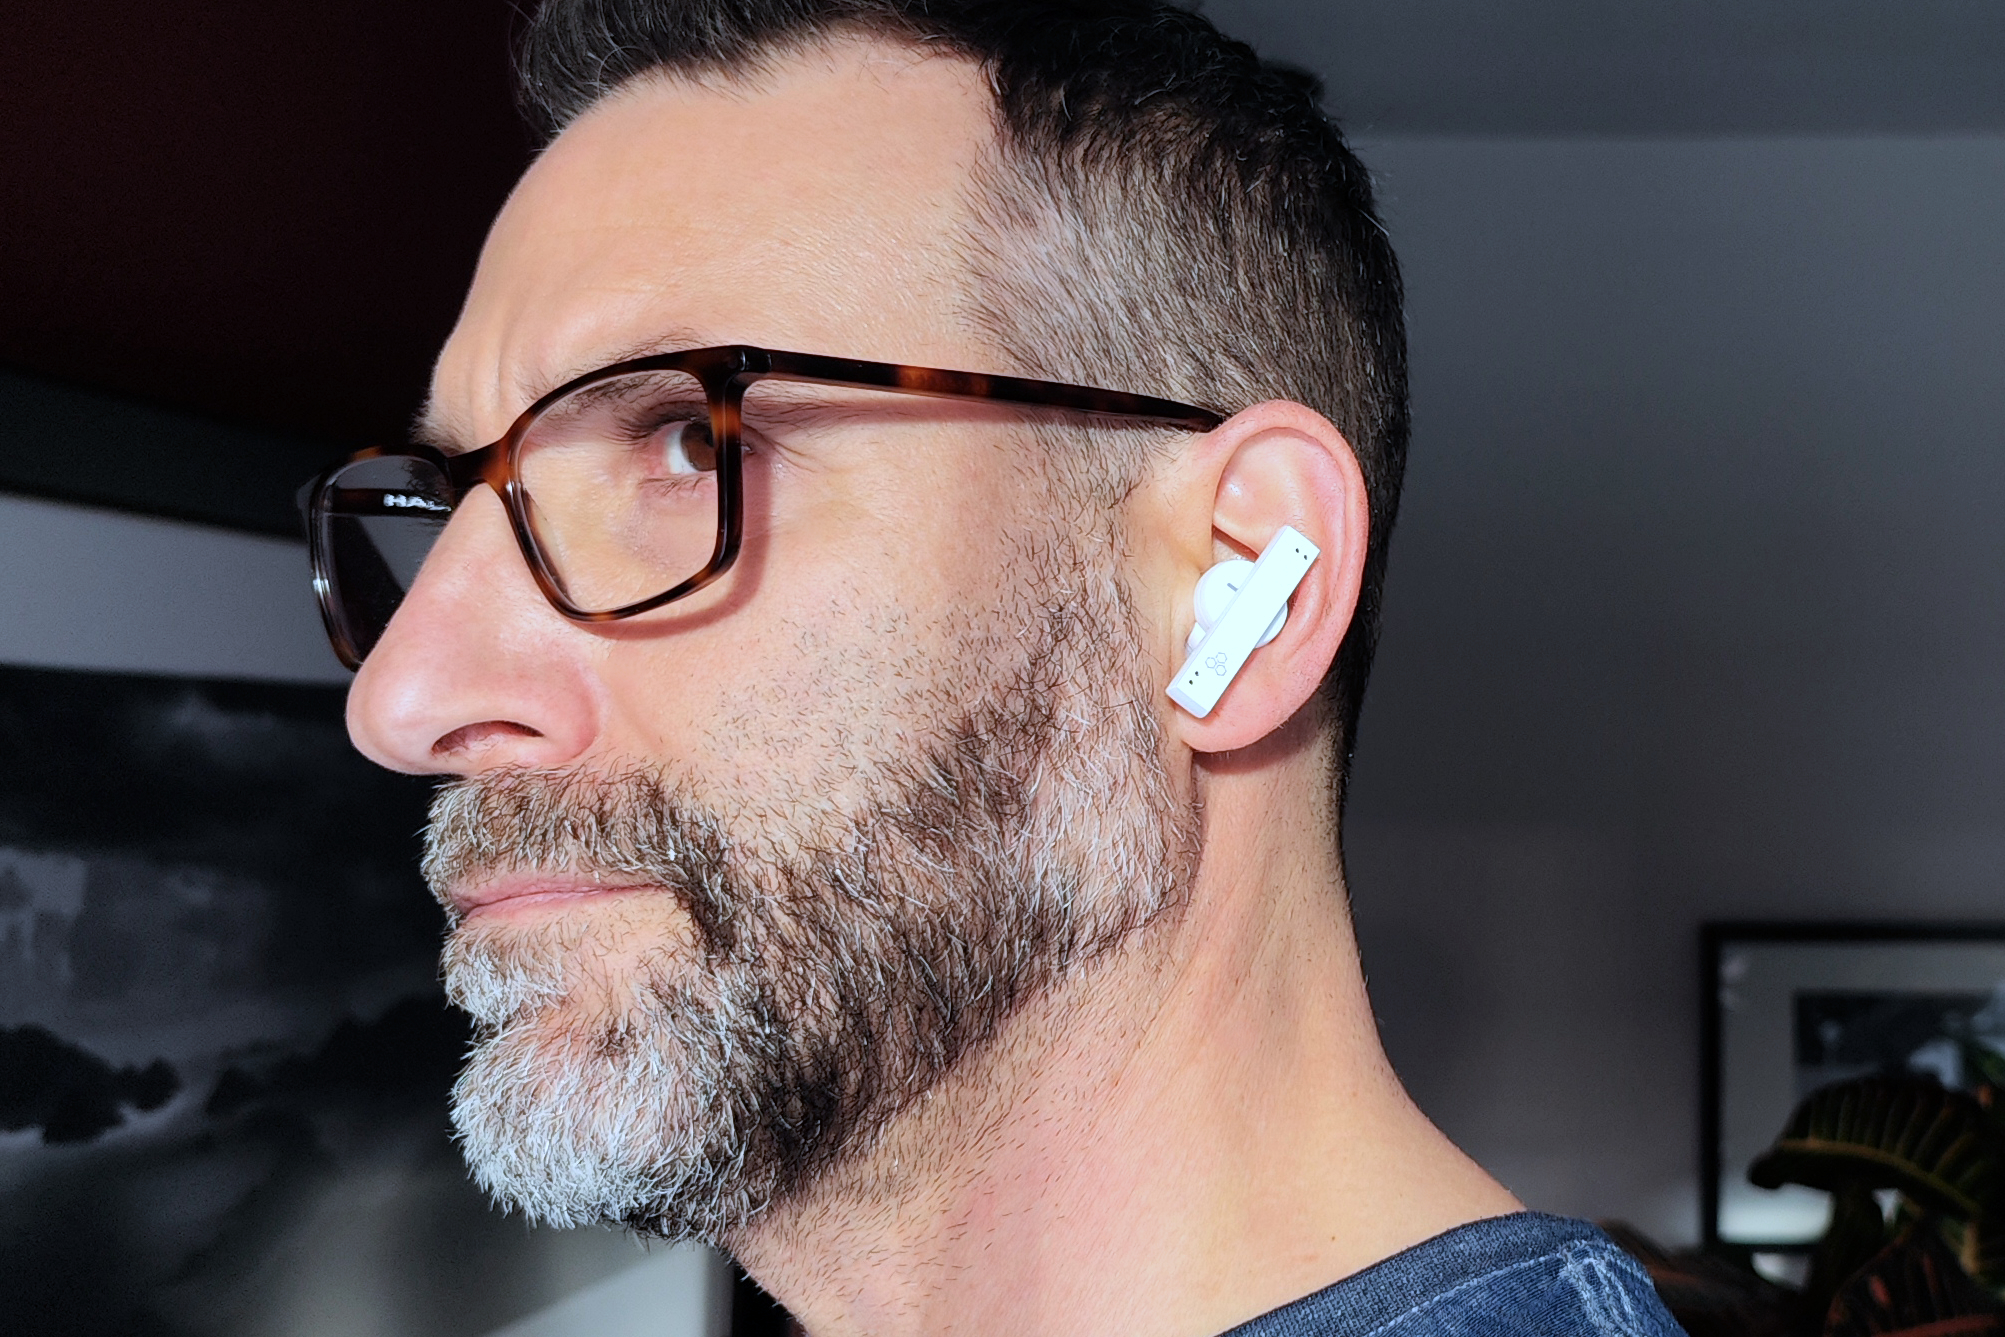 Final audio ZE8000 review: distinctive earbuds for discerning ears